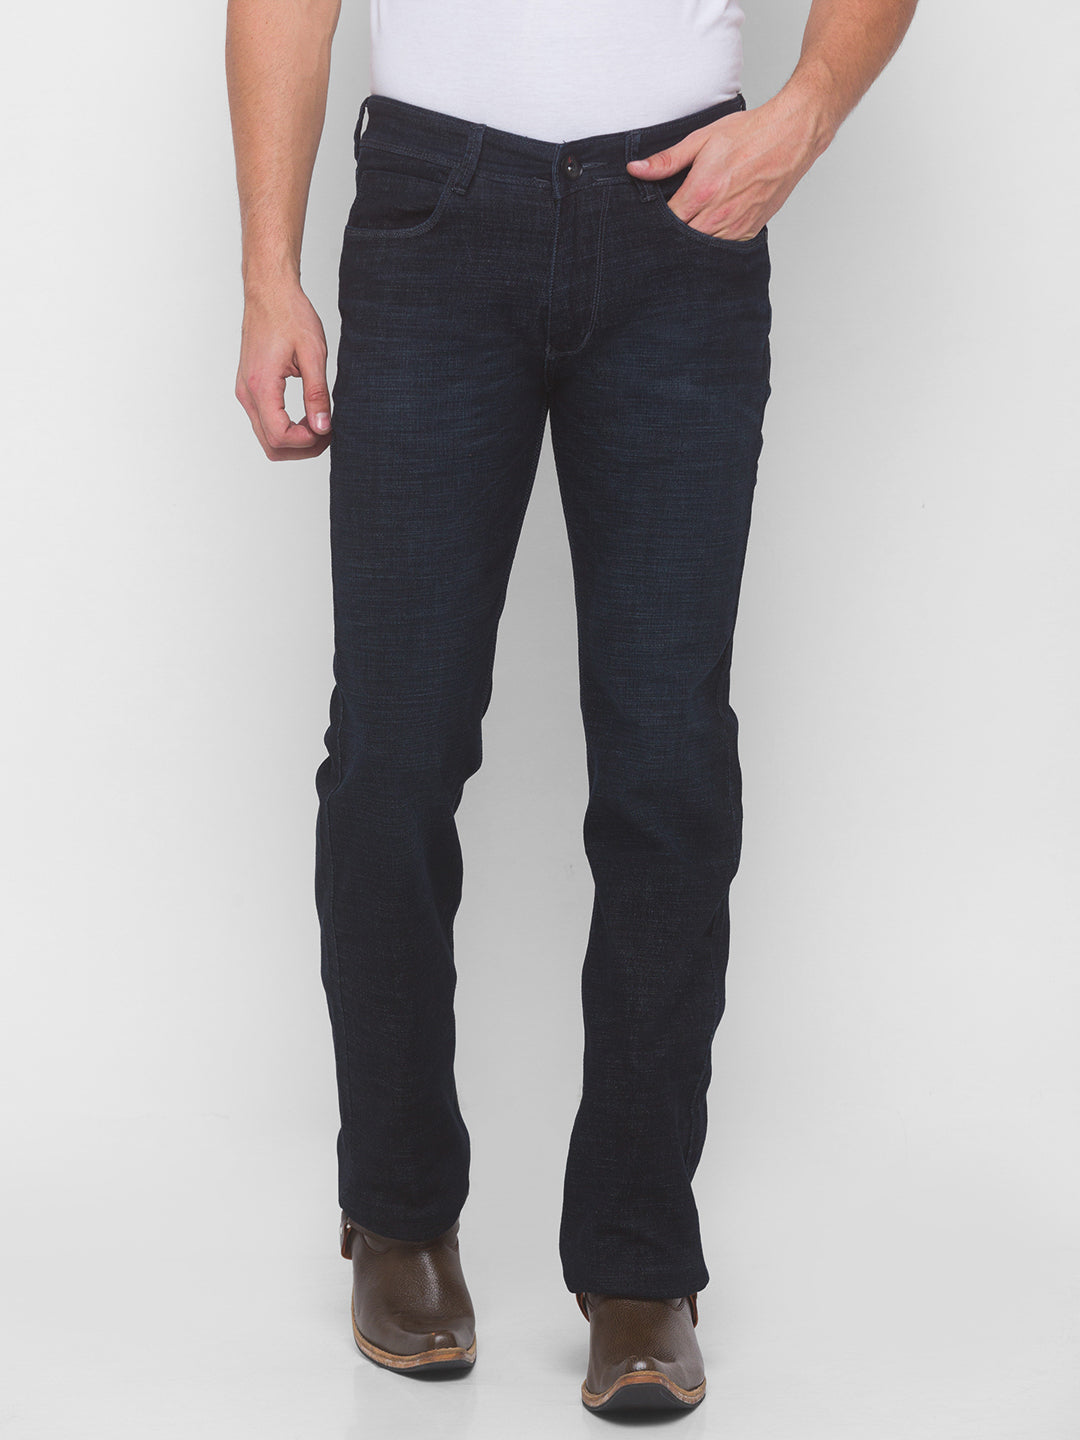 Navy Blue Crossfire Bootcut Jeans